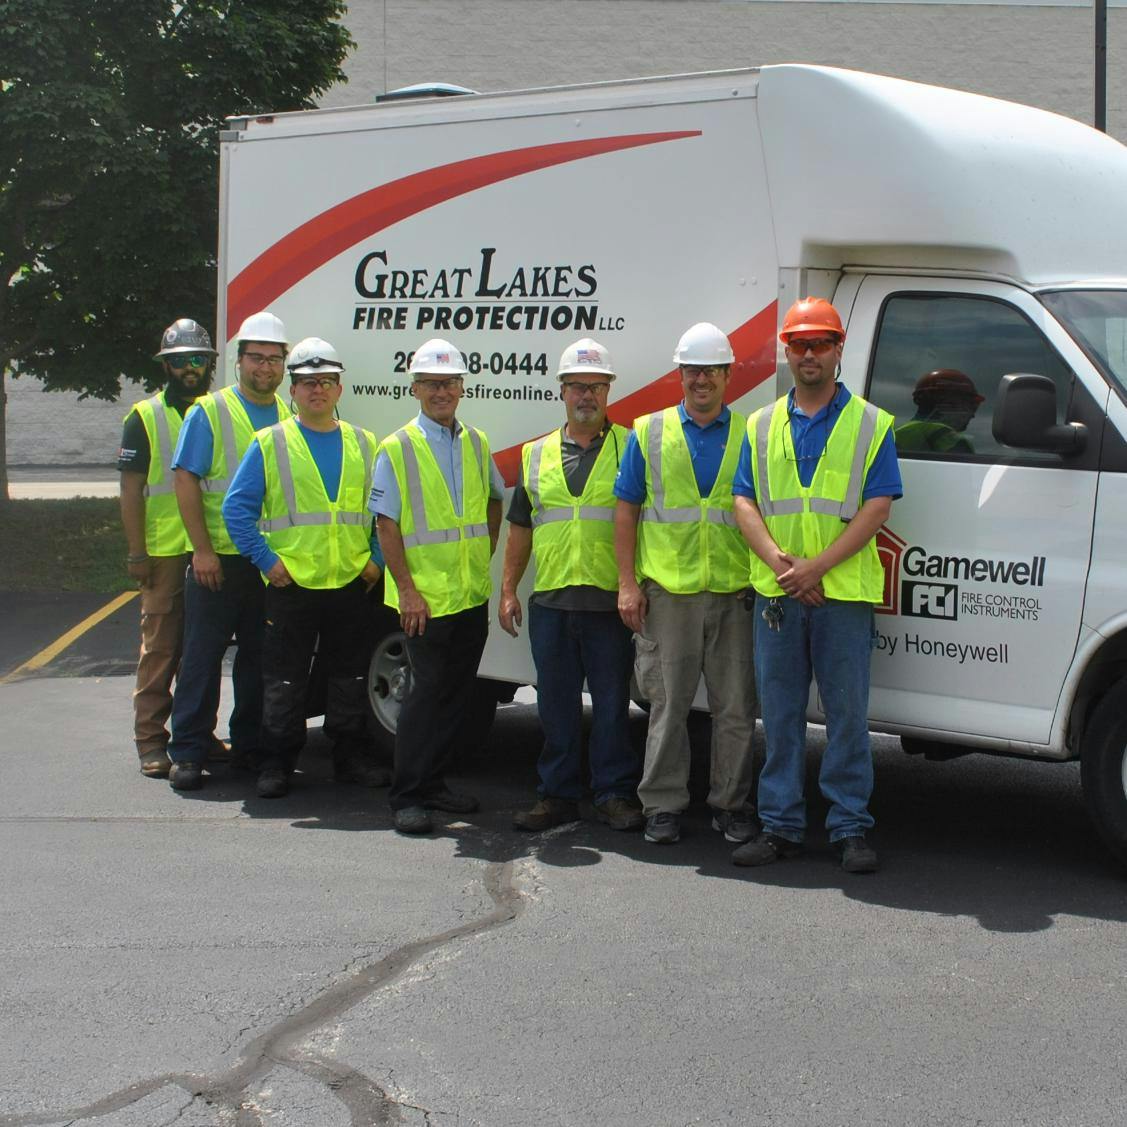 Pictured above: (Left to right) Deavn Rauth- Sprinkler Fitter, Elliot Pederson-Suppression Tech/Installer, Kelsent Campos-Suppression Tech/Installer, Randy Rauth- Owner/Supervisor, Mark Swanson-Operations Manager, Joe Cresca- Operations Manager, Tony Thalhammer-Senior LV Tech